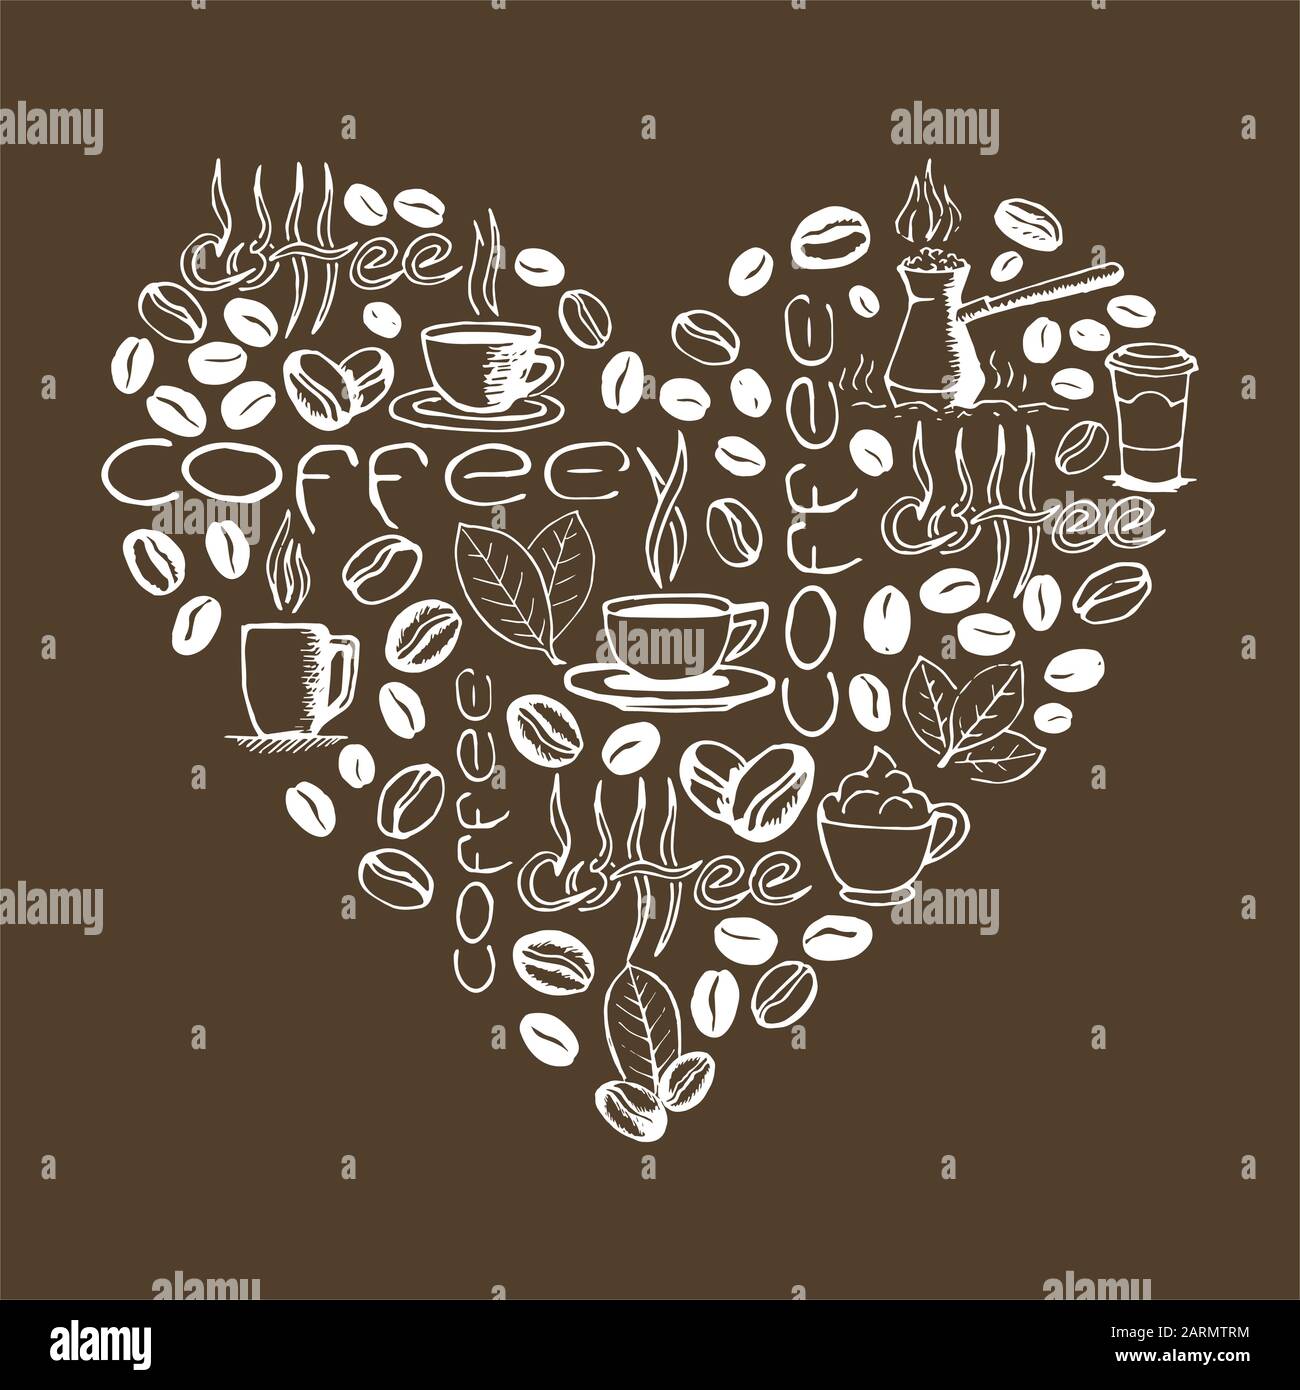 https://c8.alamy.com/comp/2ARMTRM/heart-shape-filled-by-hand-drawn-coffee-doodles-isolated-on-brown-background-coffee-cup-cezve-beans-leaves-symbols-and-lettering-sketchy-vector-e-2ARMTRM.jpg